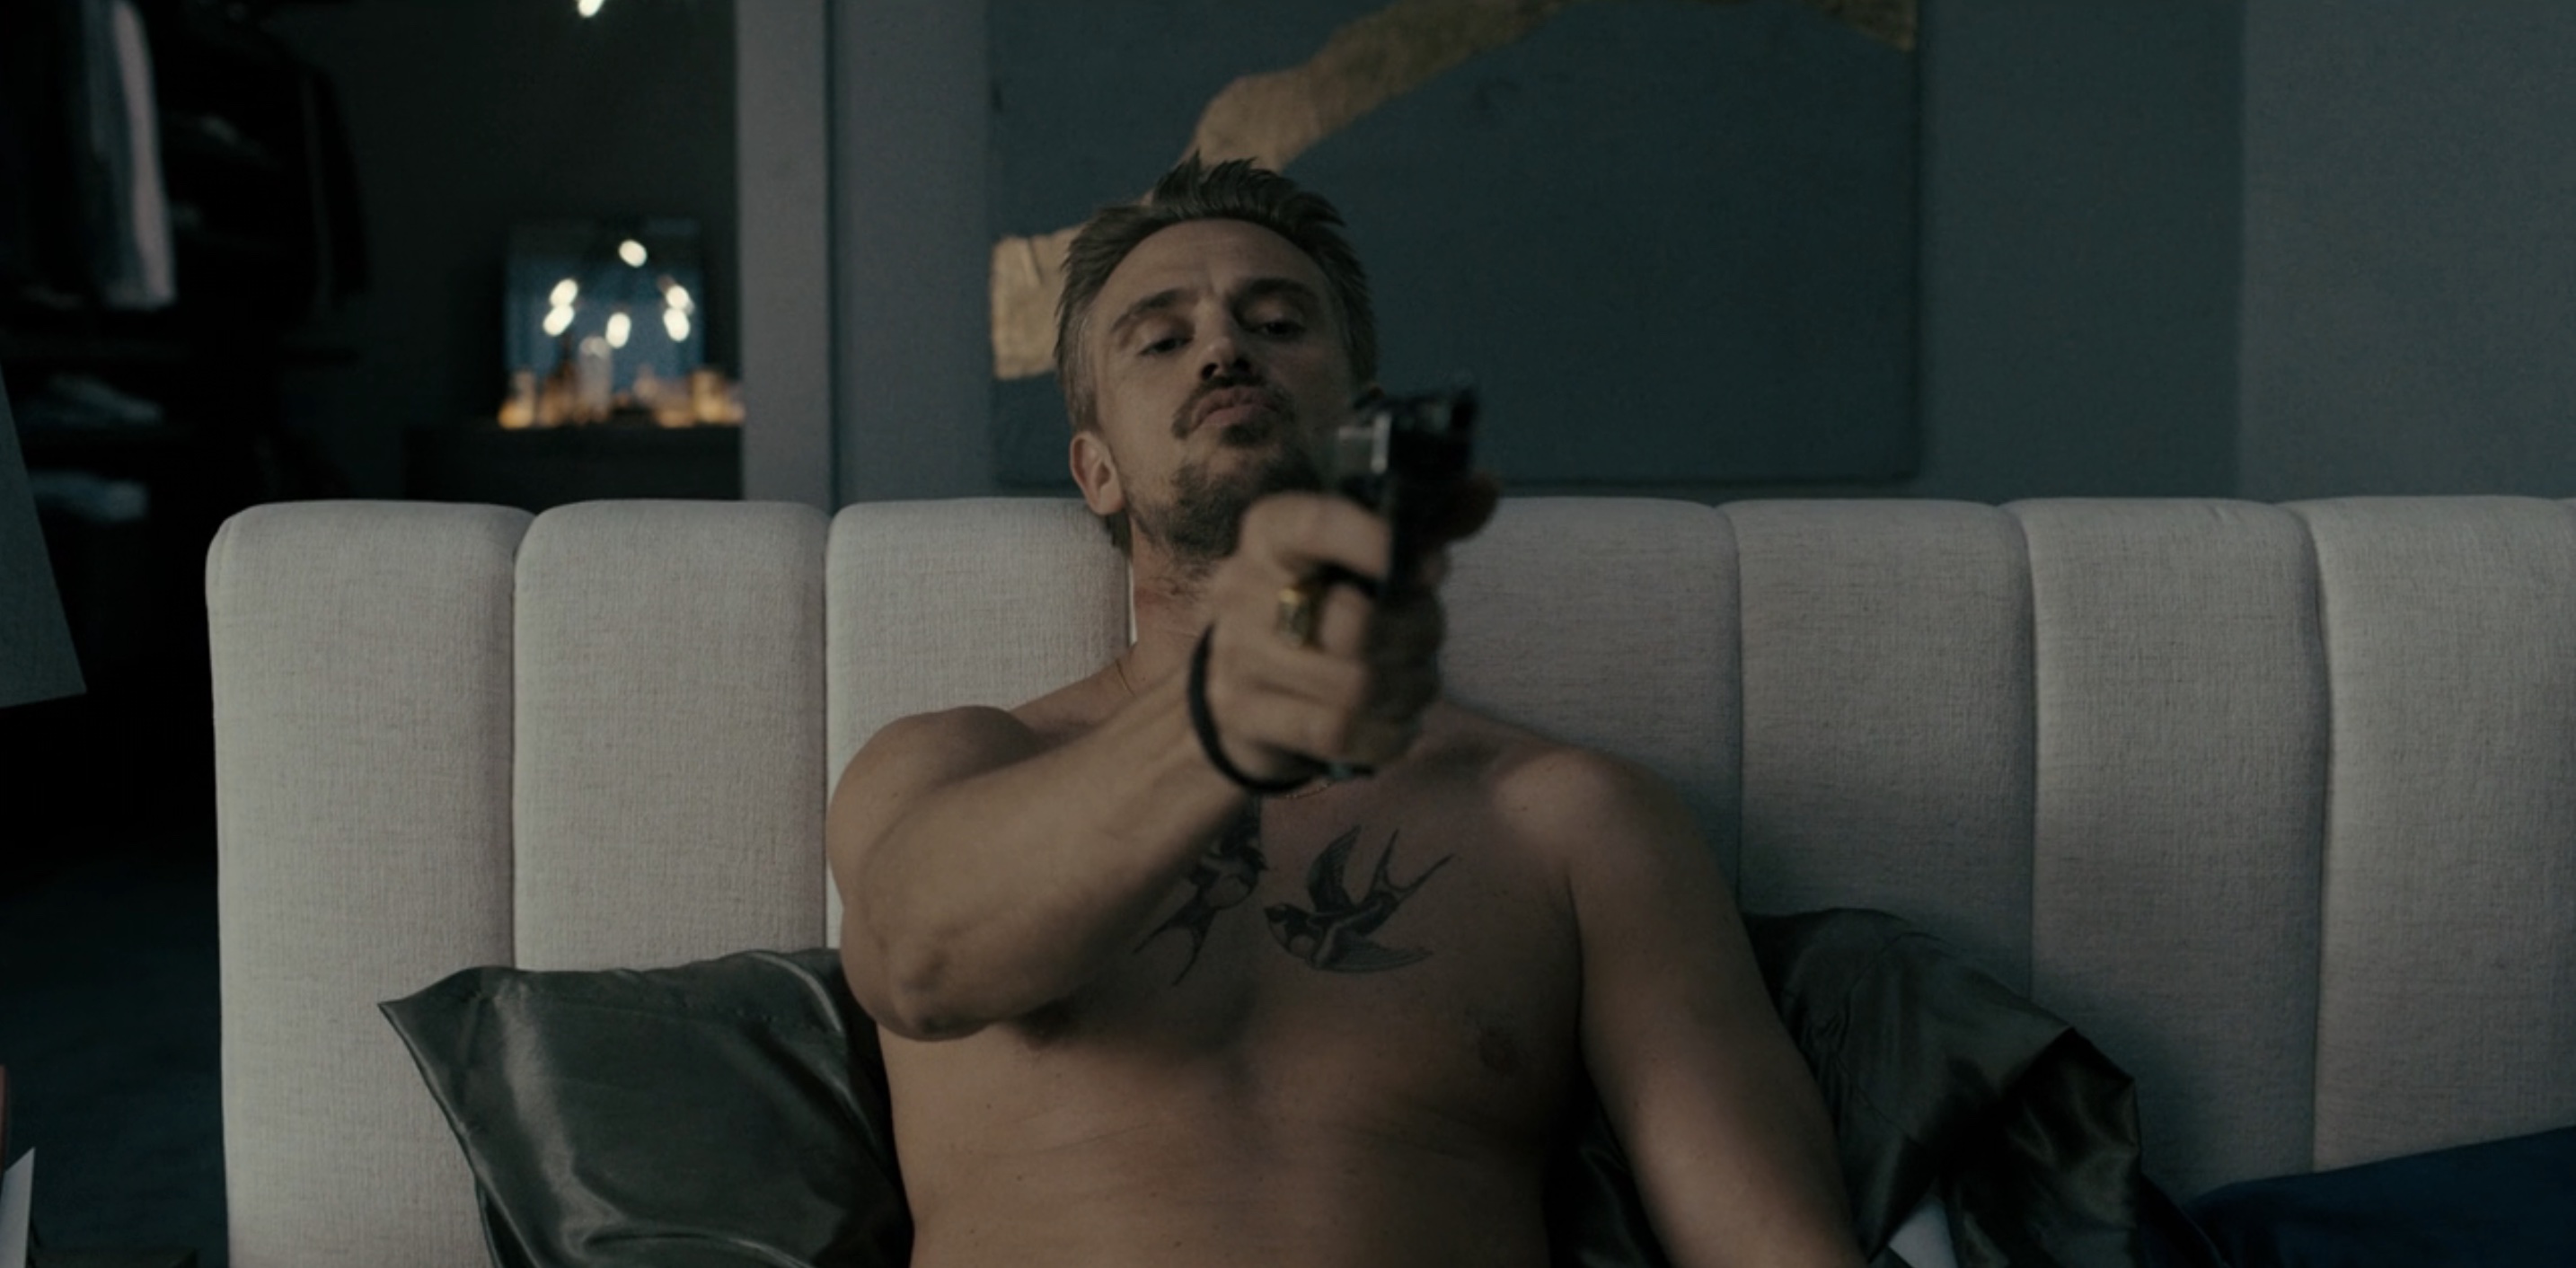 Justified: City Primeval Cast on FX and Hulu - Boyd Holbrook as Clement Mansel